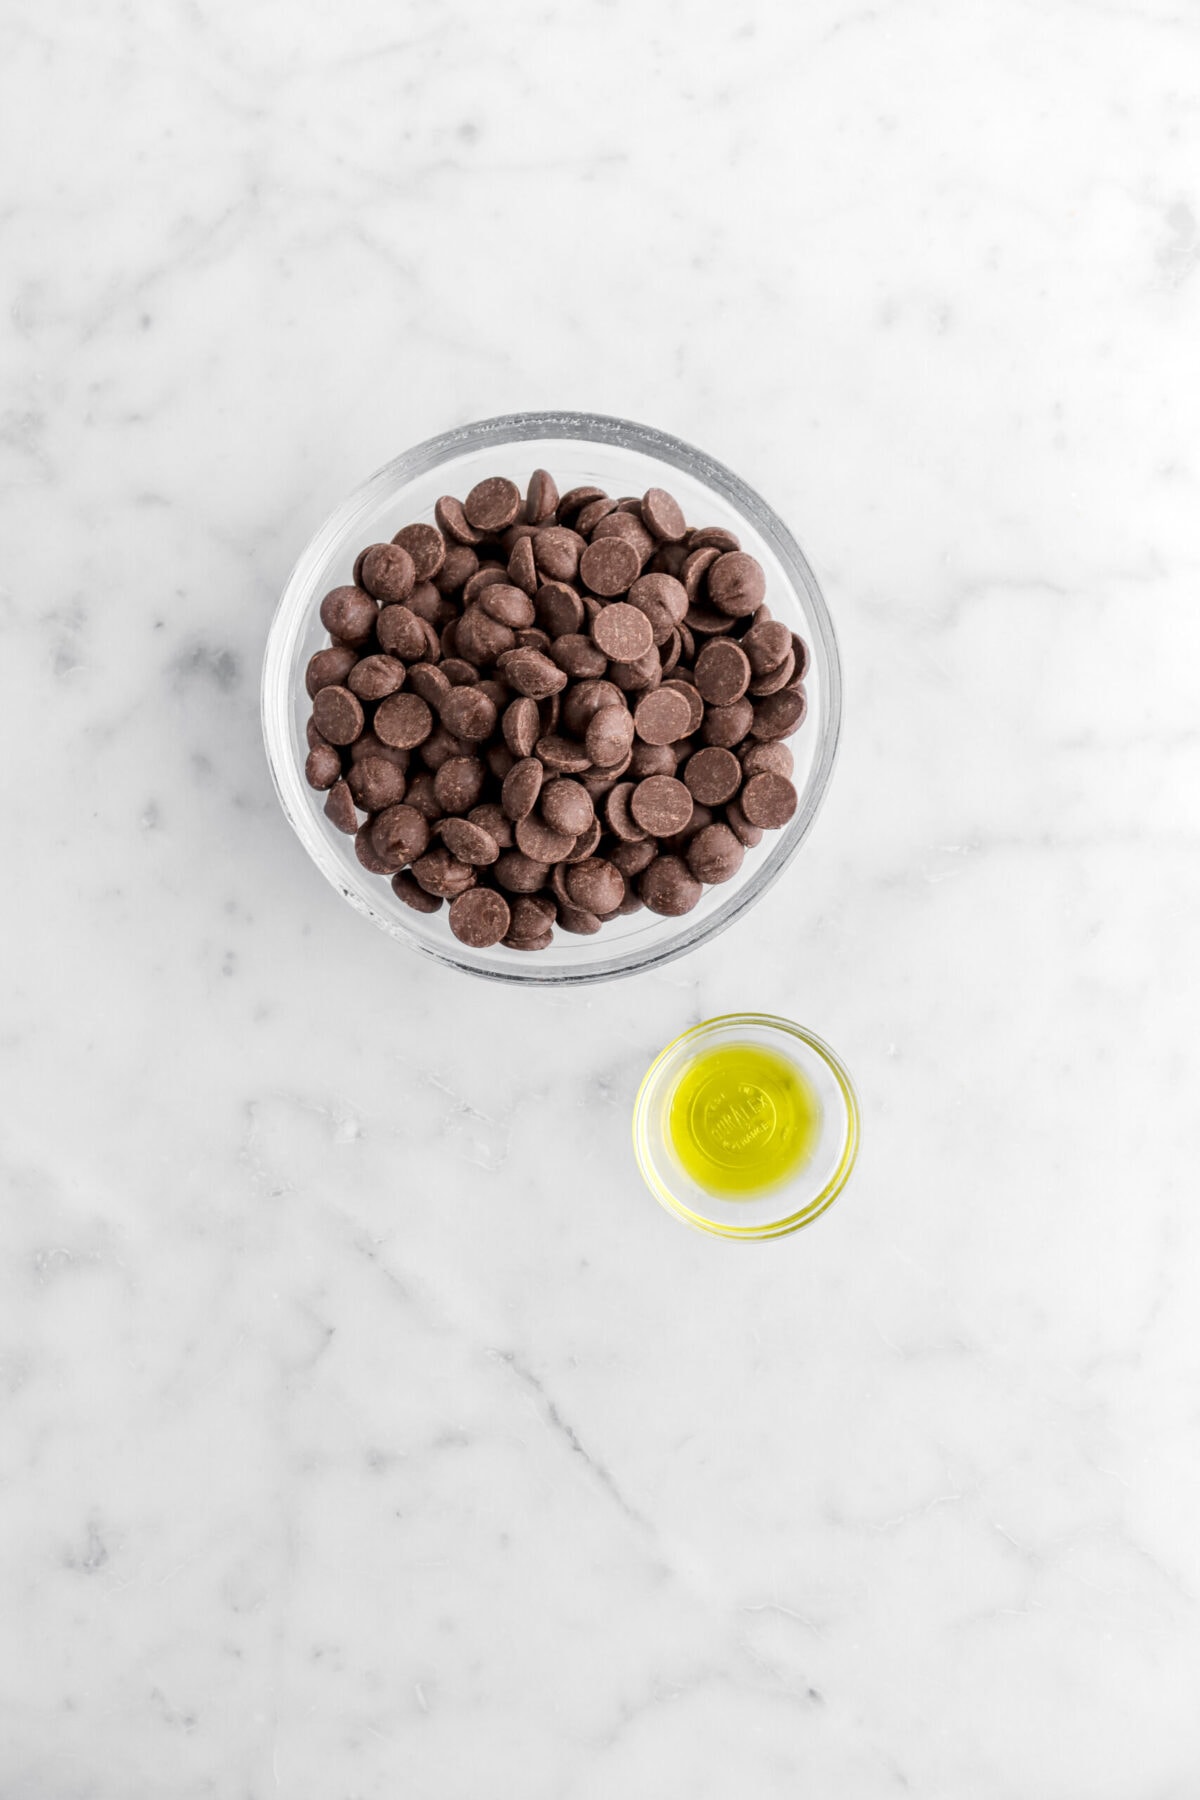 chocolate chips and olive oil in separate glass bowls on marble surface.